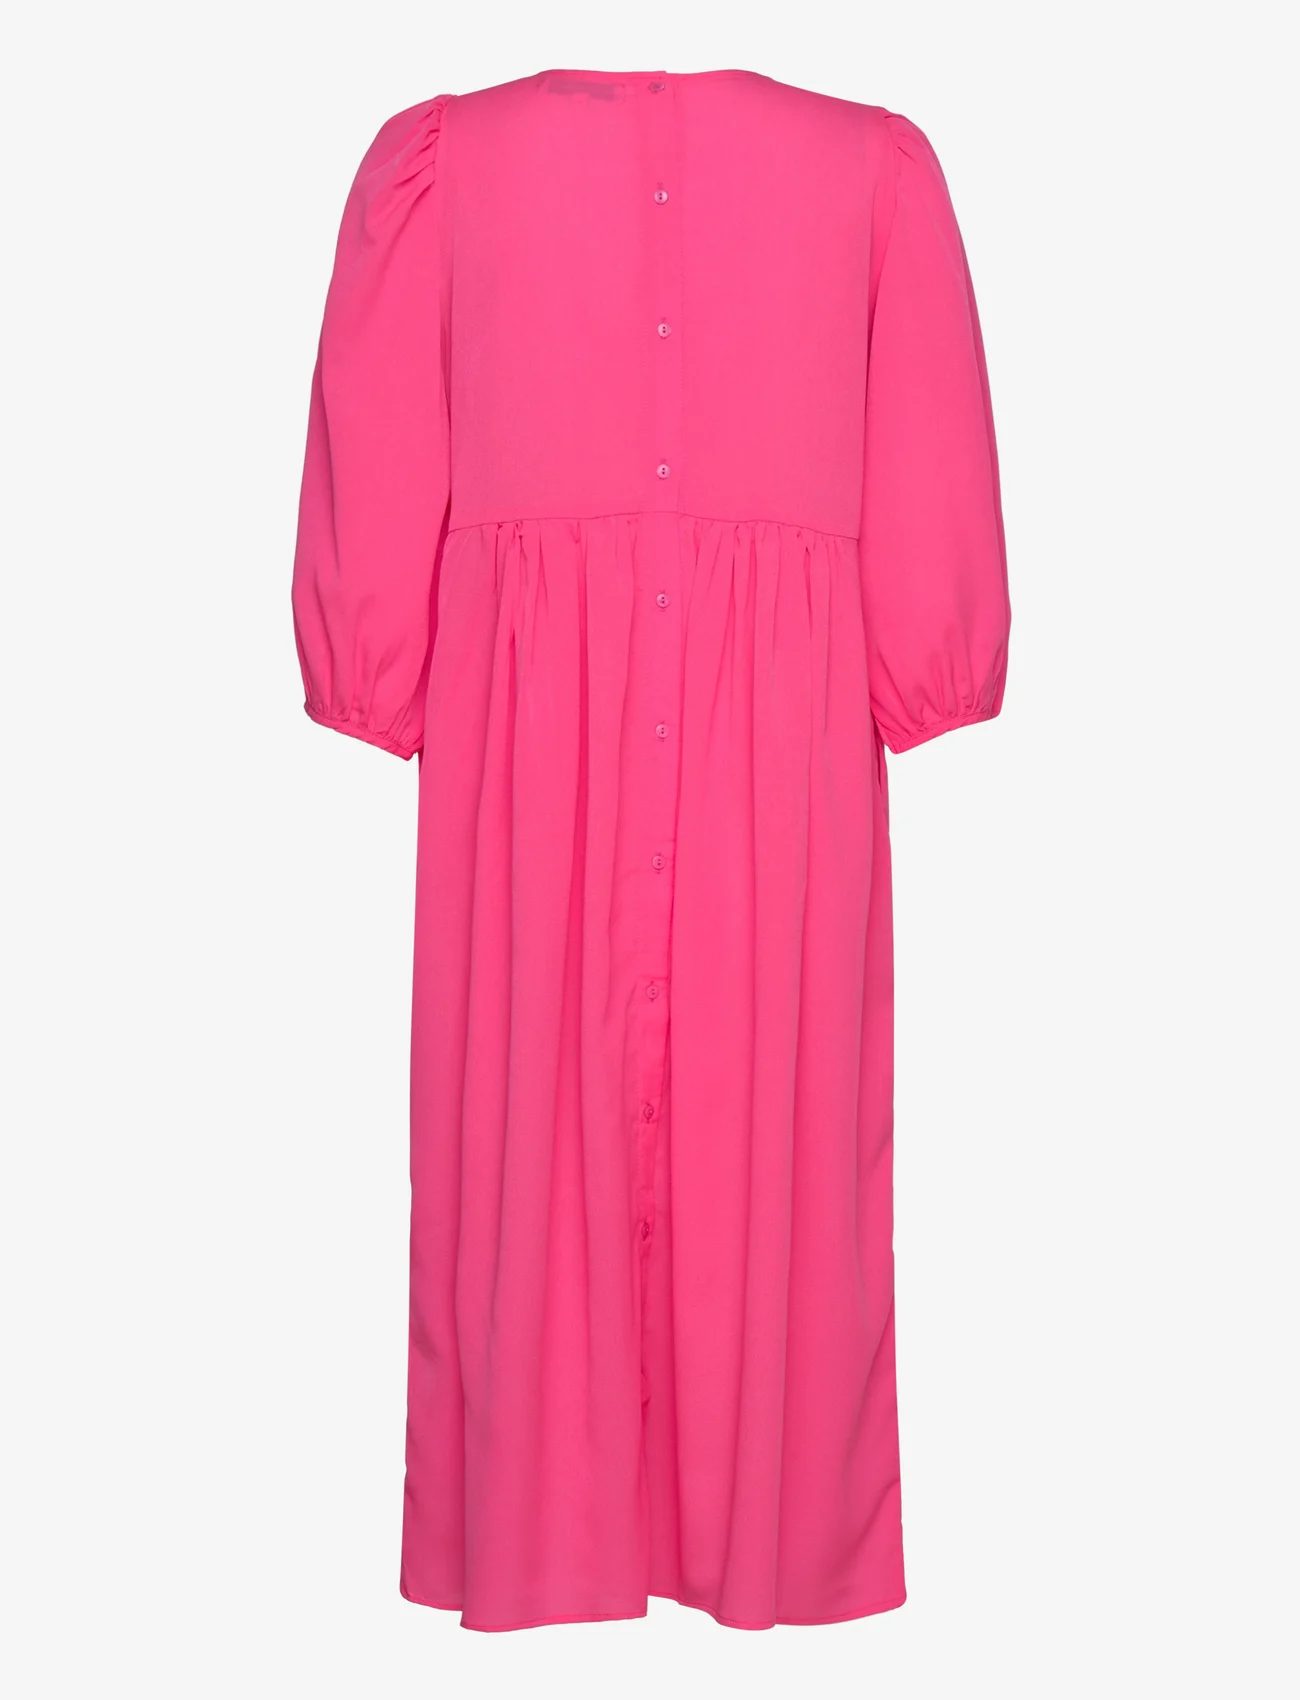 Lollys Laundry - Marion Dress - 98 neon pink - 1